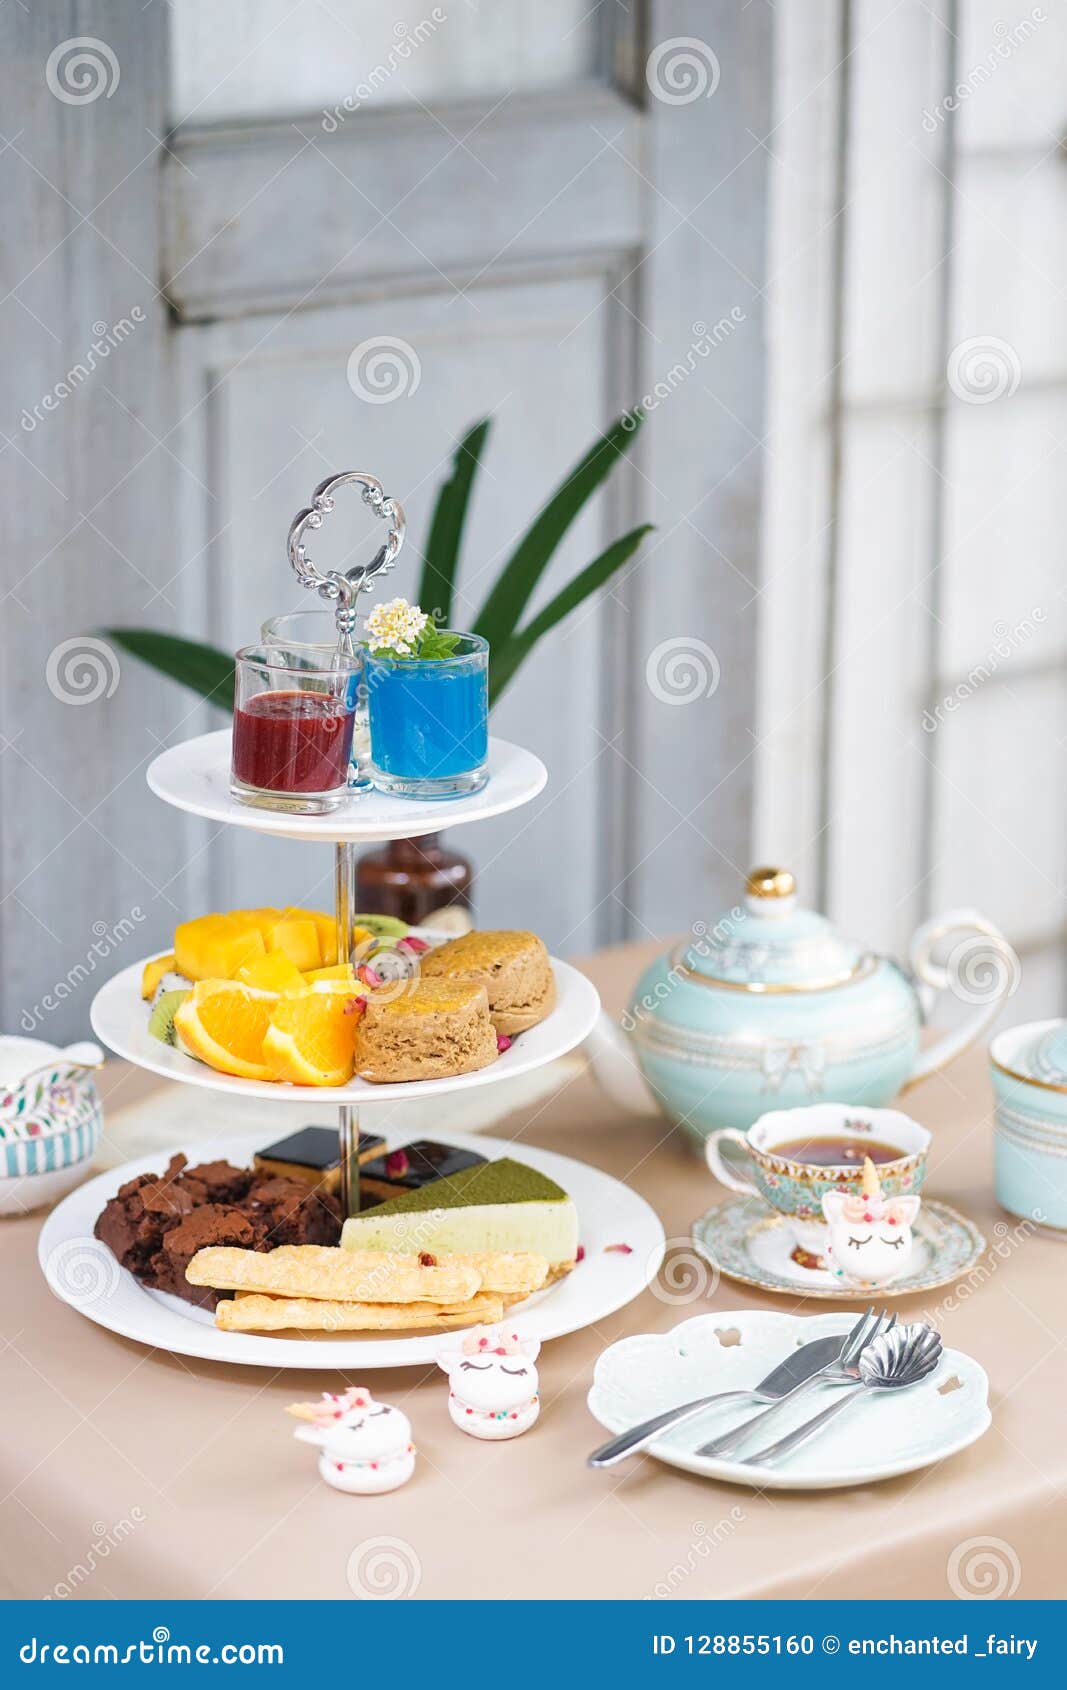 afternoon tea. tea party with unicorn macarons, scones, bakeries